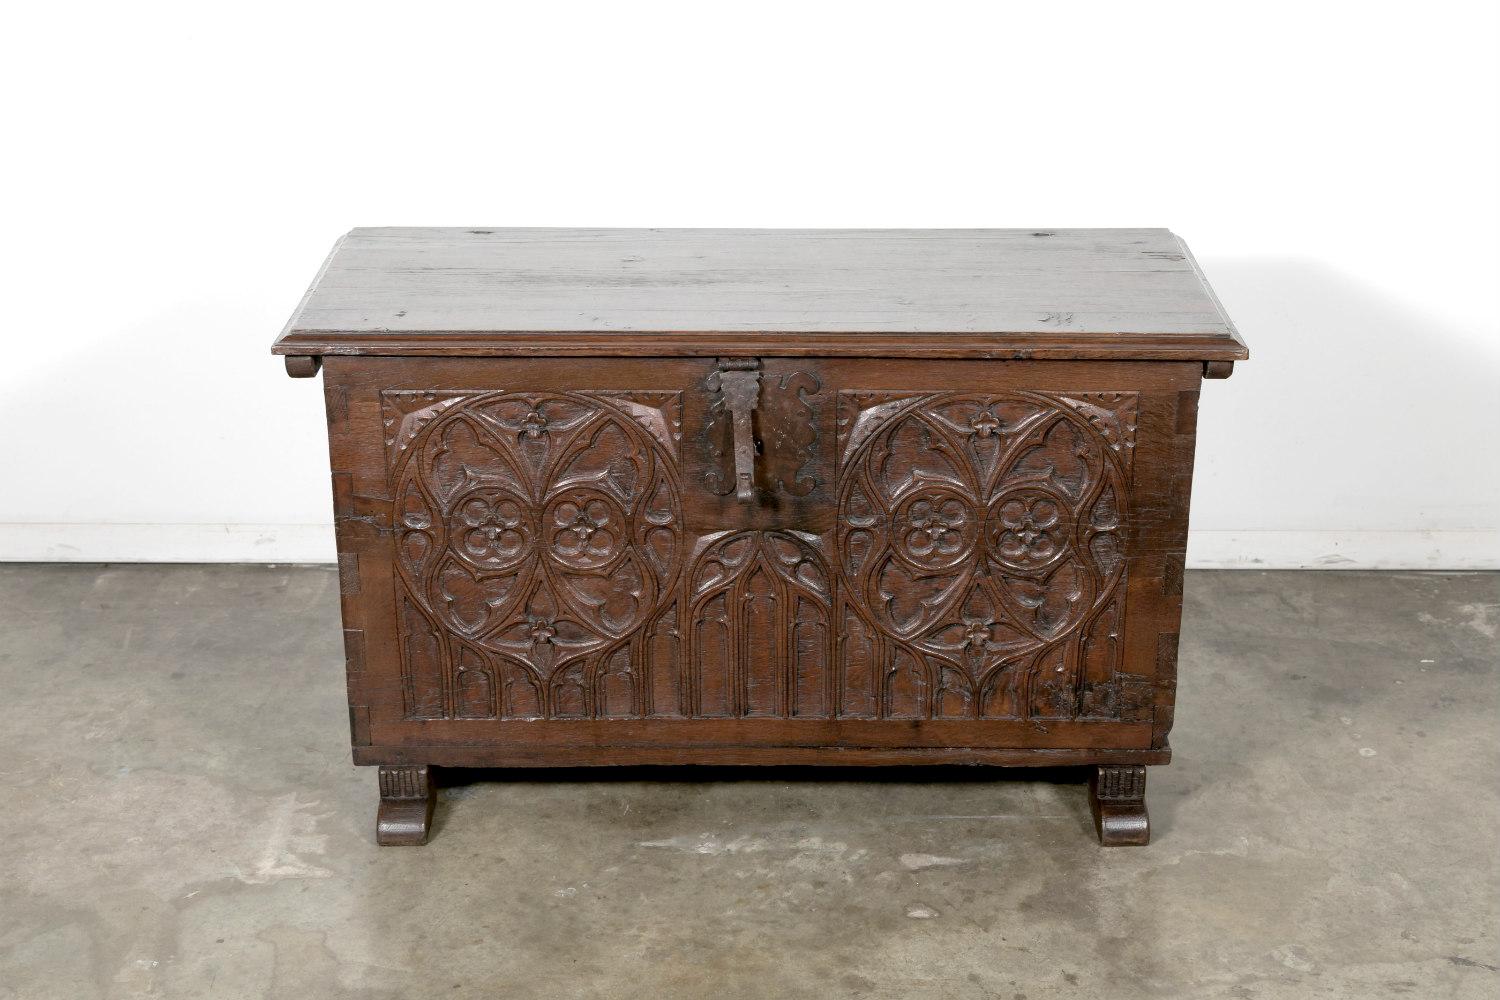 Intricately carved early-18th century Gothic style coffer handcrafted in Spain of solid oak. This small trunk, having its original hand wrought iron hardware, with a thick and solid carved lift top with beveled edges, and typical relief carved